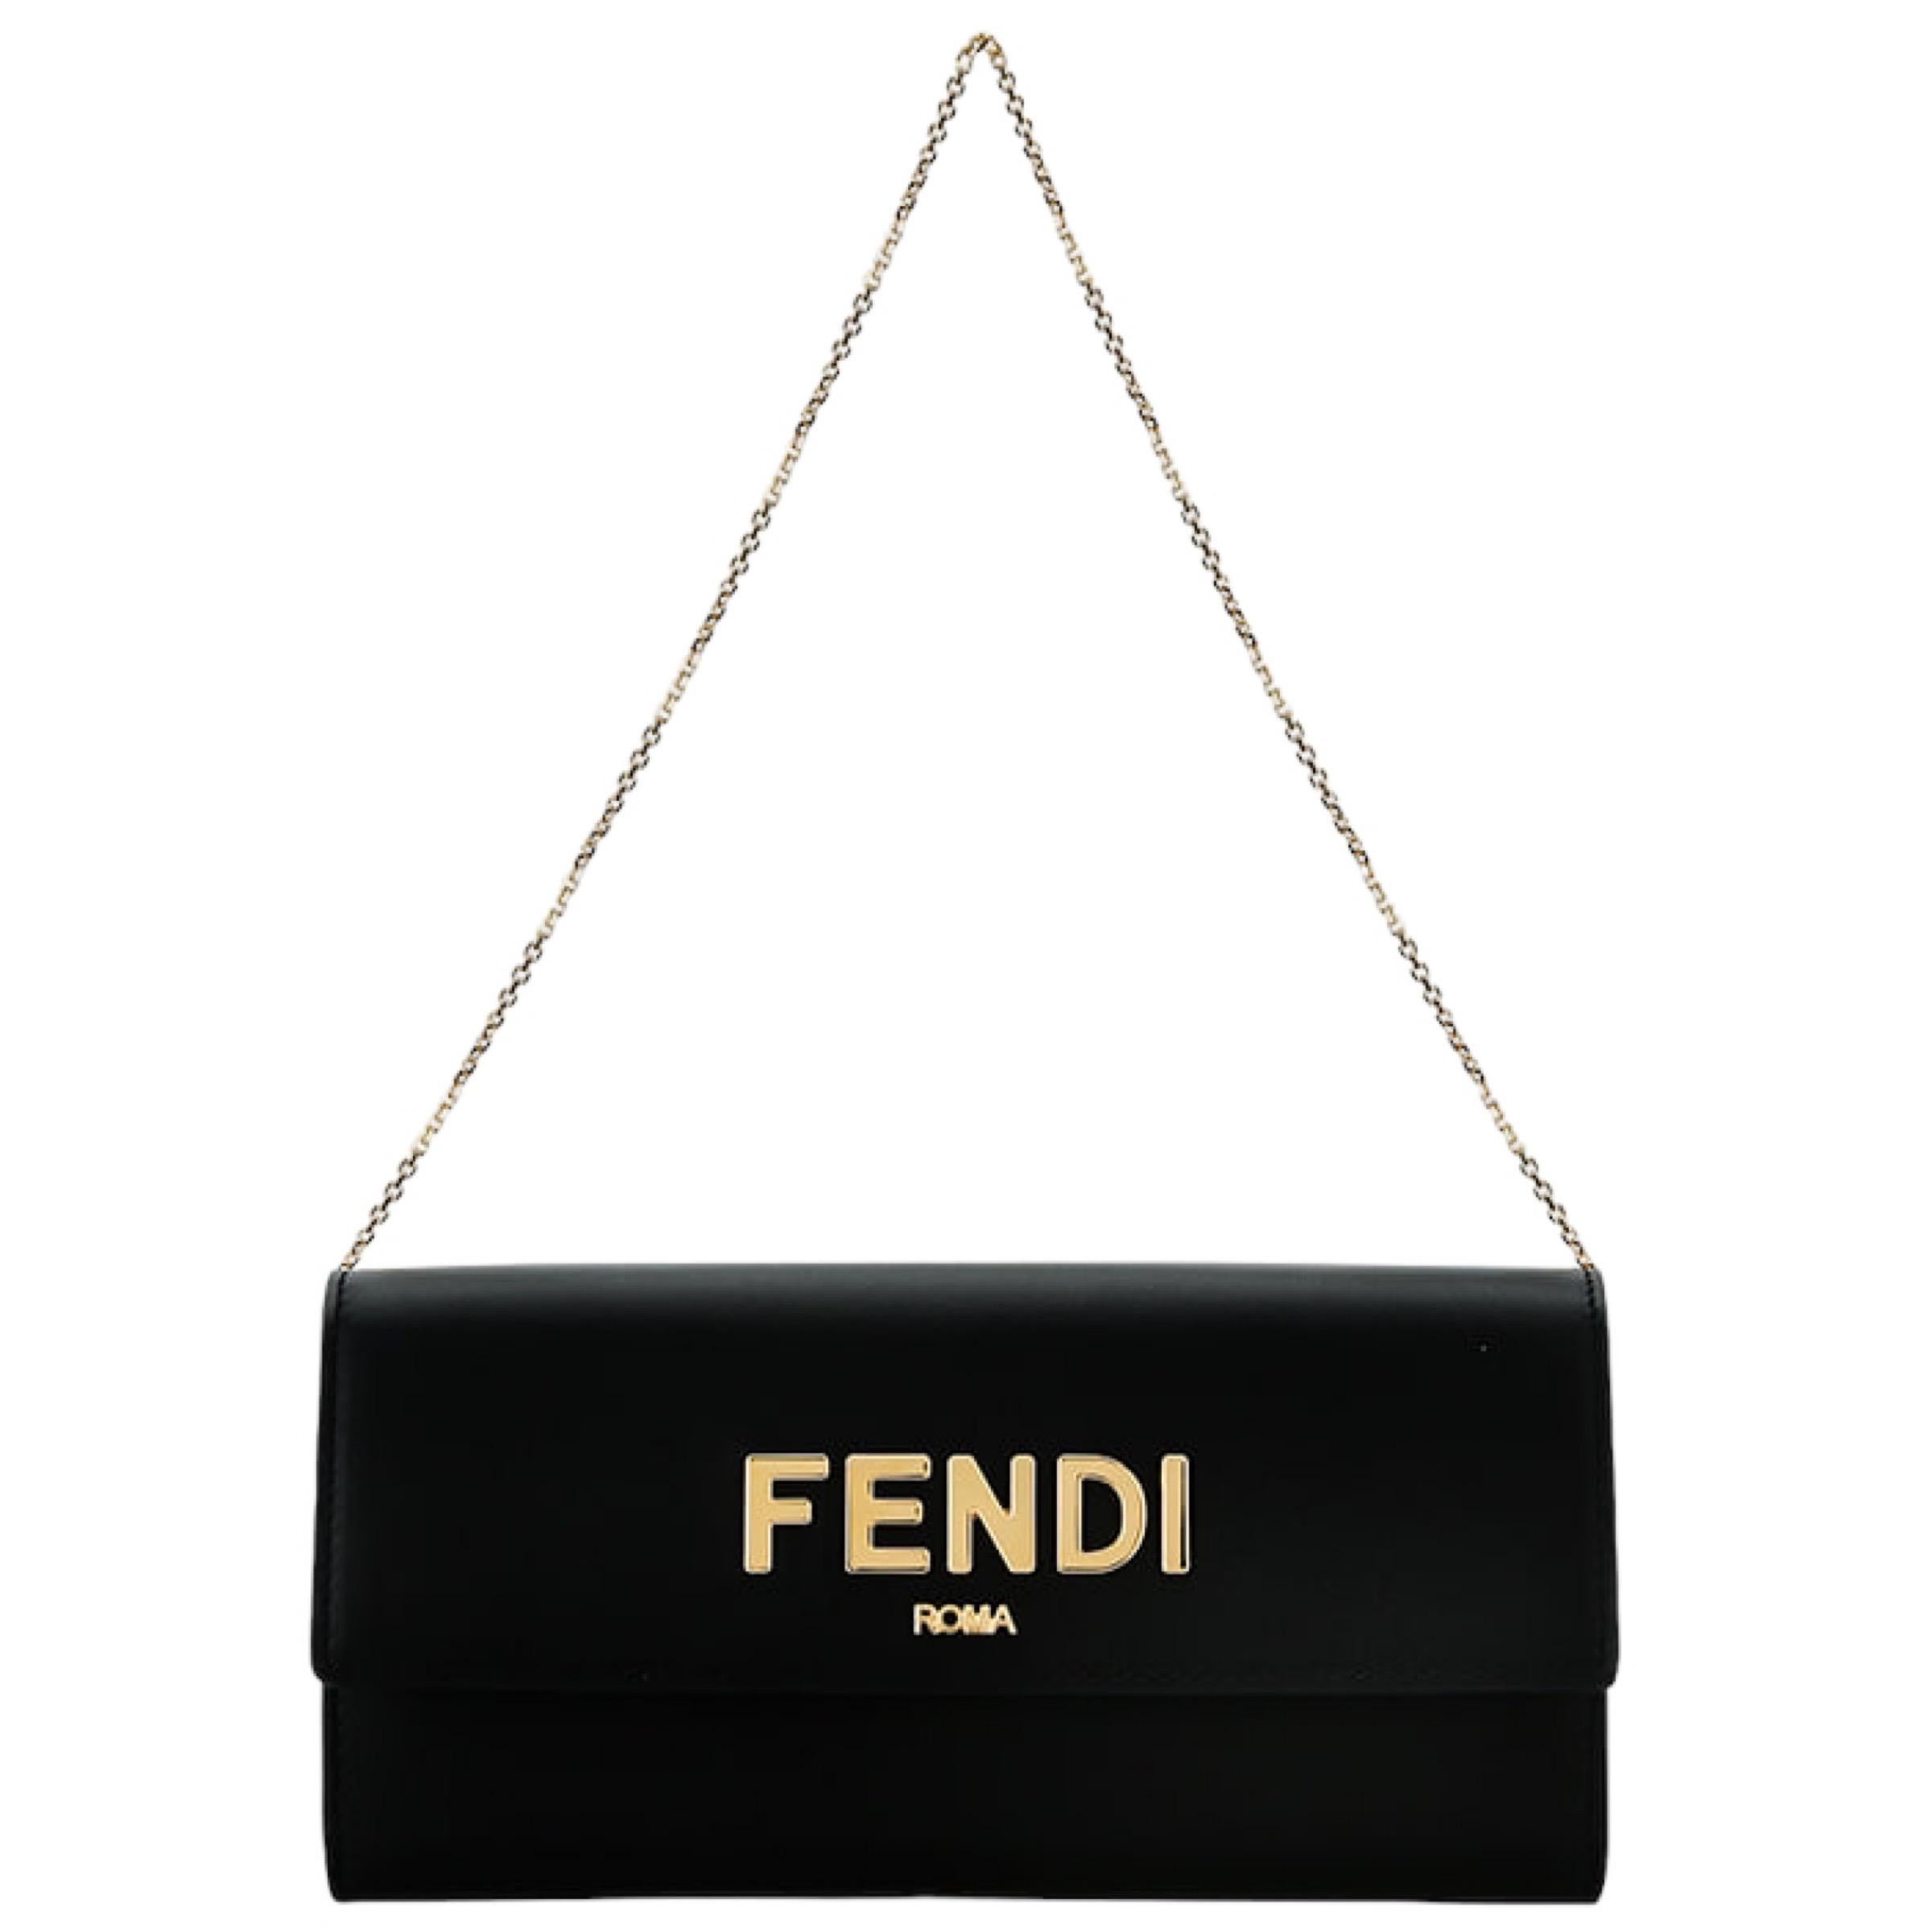 NEW Fendi Black Roma Leather Continental Wallet Clutch Crossbody Bag For Sale 2